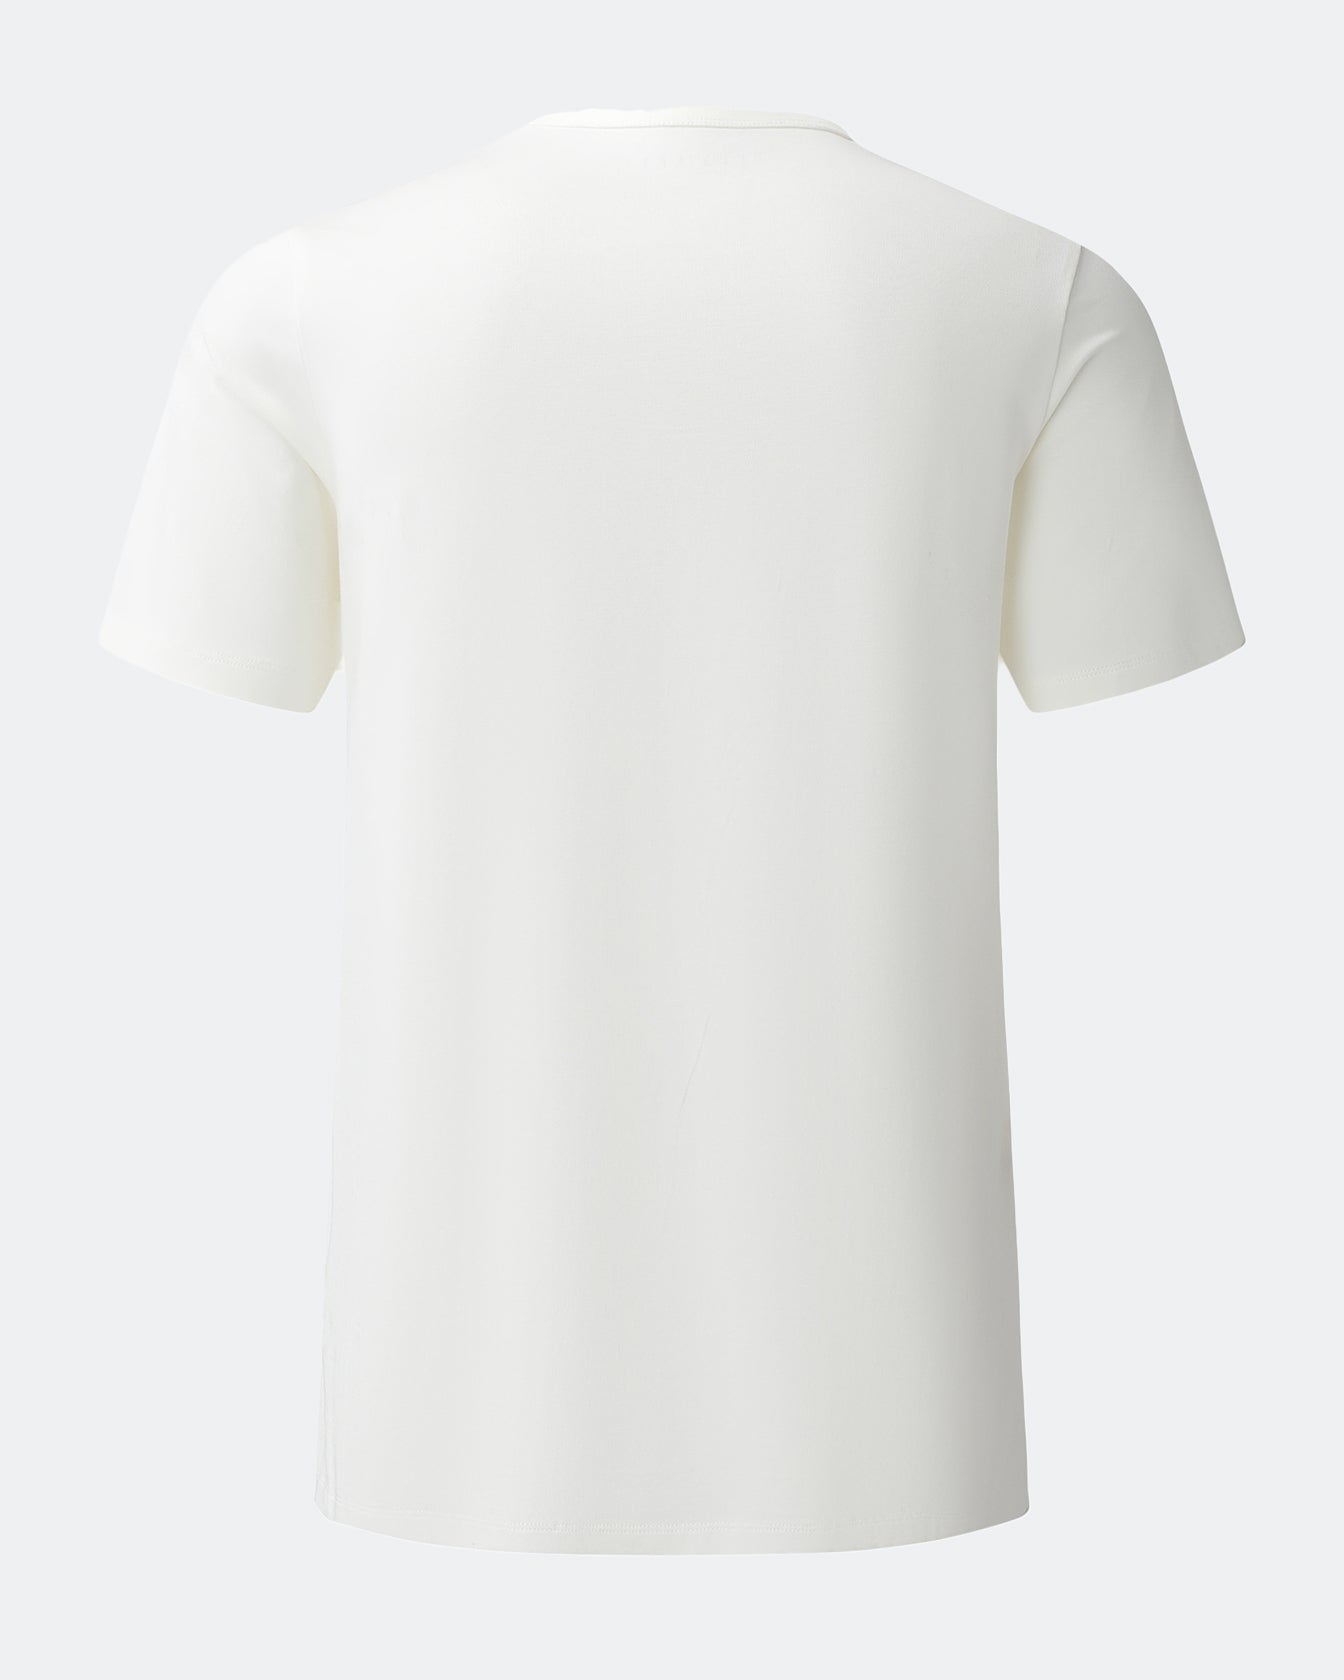 Spectacle 2.0 Off White T-Shirt